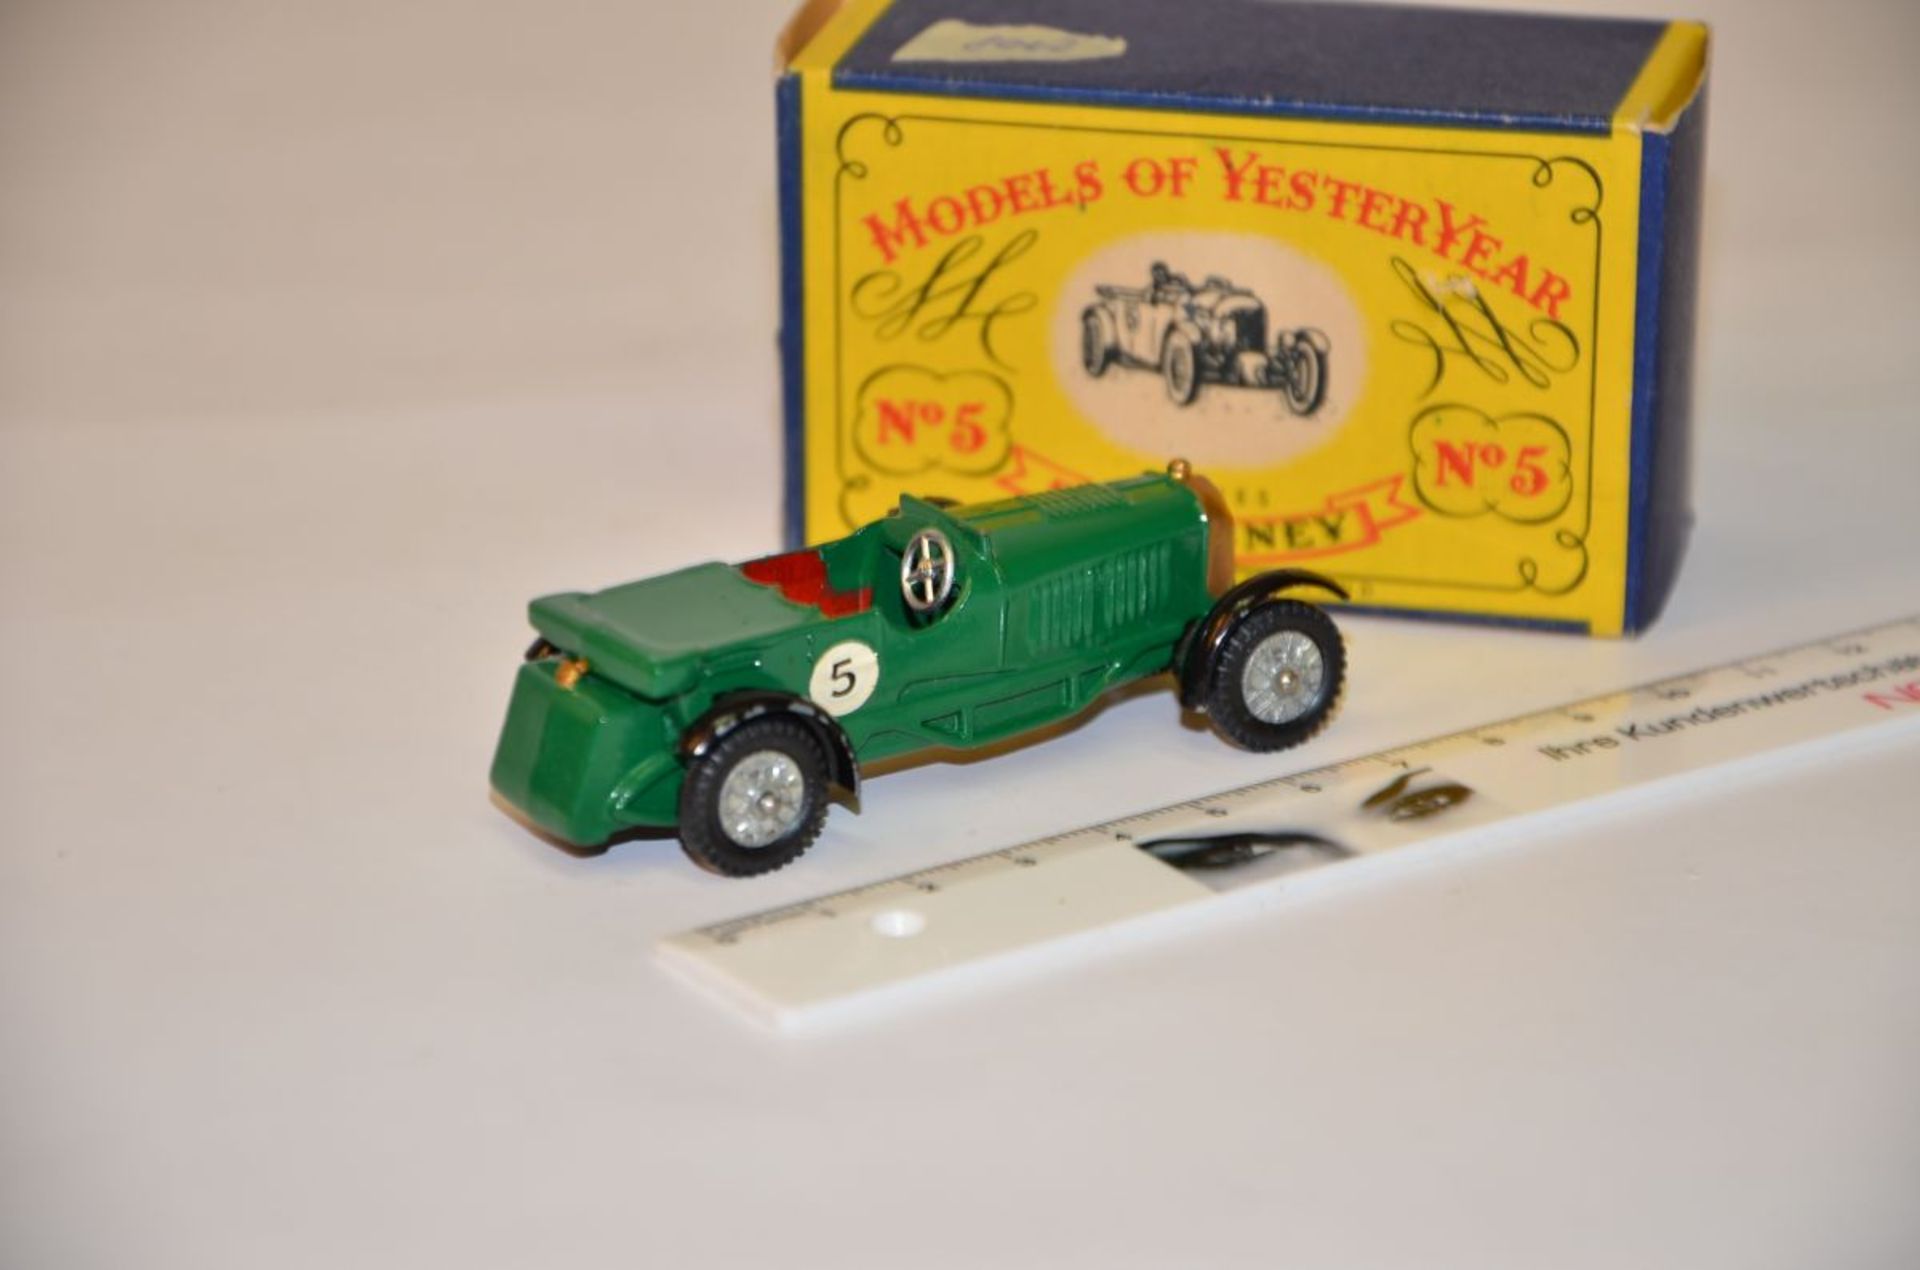 Lesney "1929 Le Mans Bentley" Models of Yesteryear No. 5 - Image 2 of 2